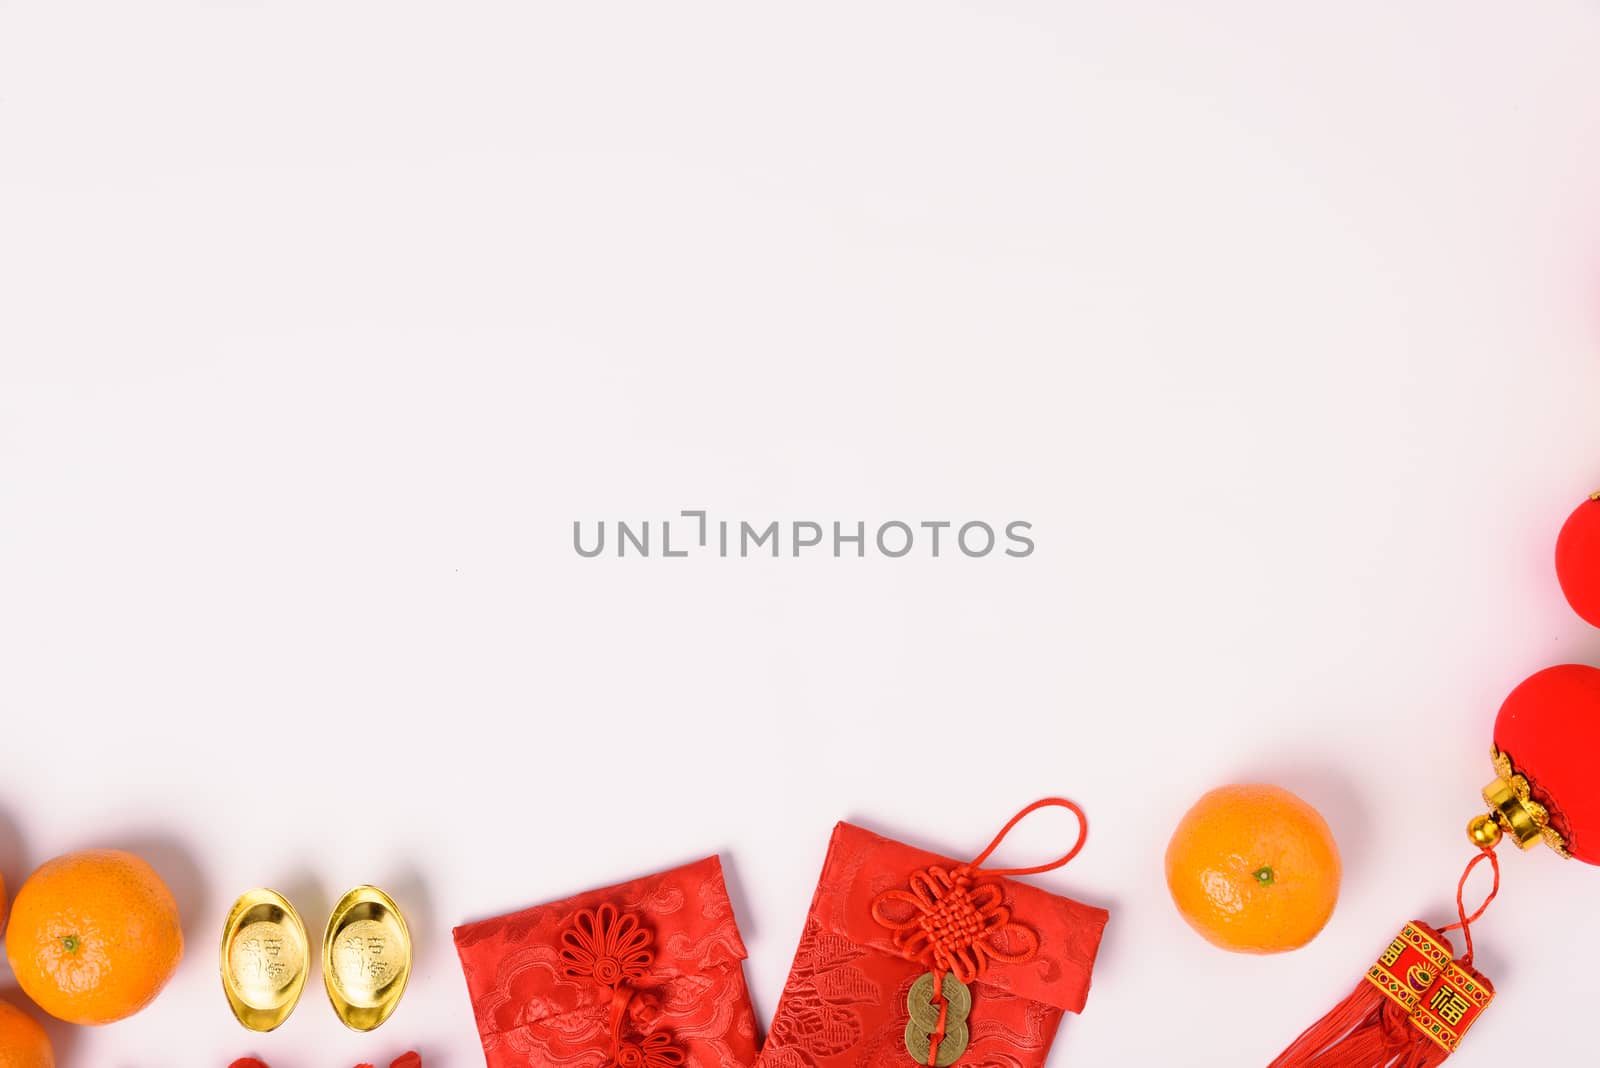 Chinese new year festival concept, flat lay top view, Happy Chinese new year with Red envelope and gold ingot (Character "FU" means fortune, blessing) on white background with copy space for text